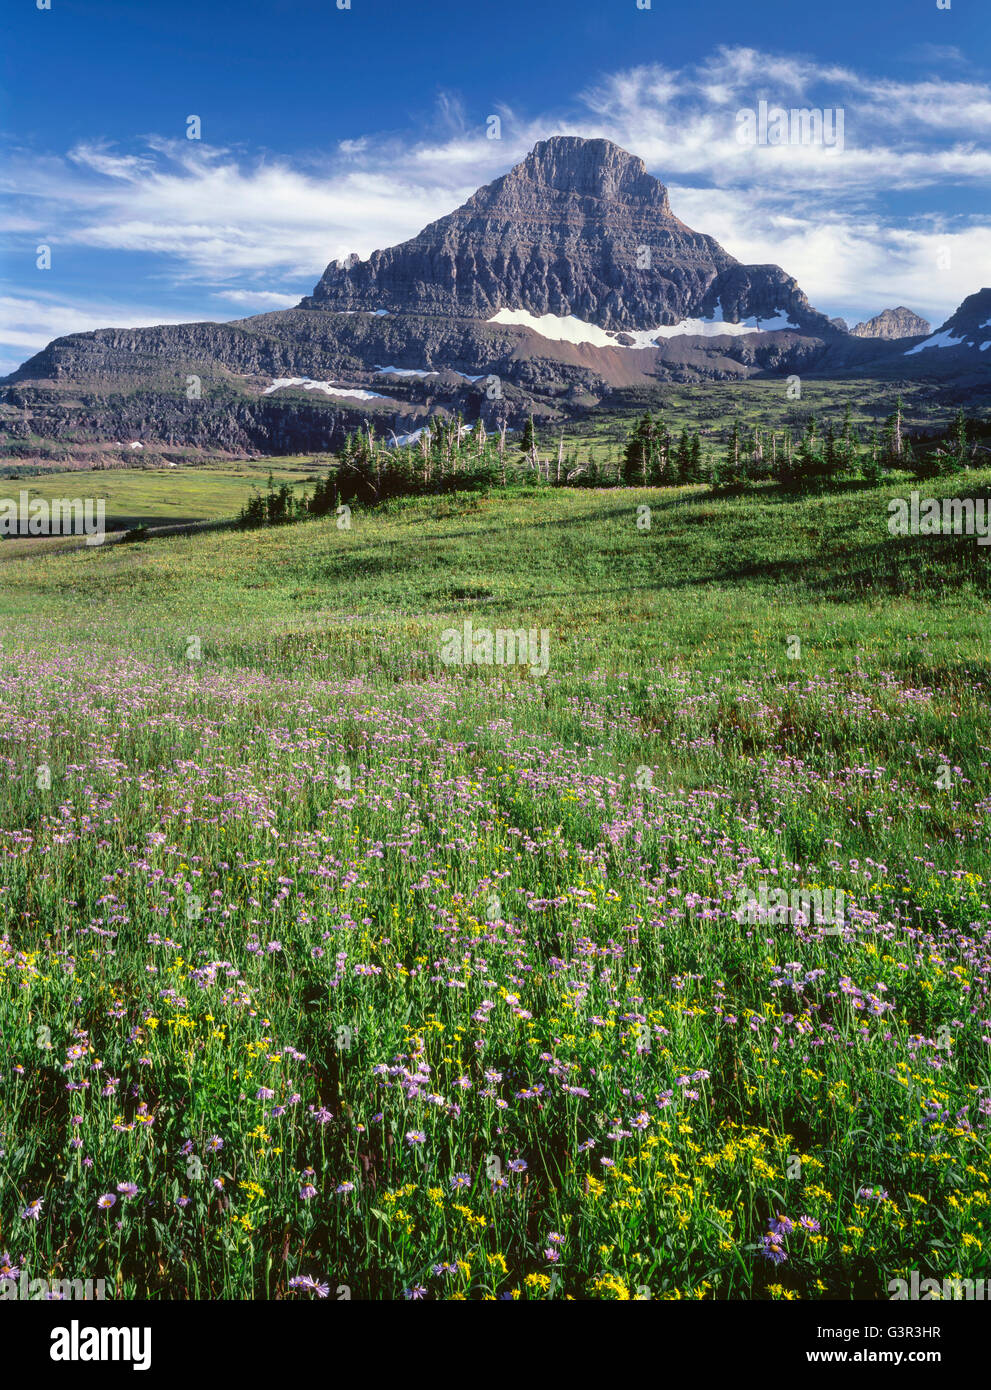 USA, Montana, Glacier National Park, Reynolds Mountain rises beyond wind-stunted conifers and meadow of showy fleabane and arnic Stock Photo